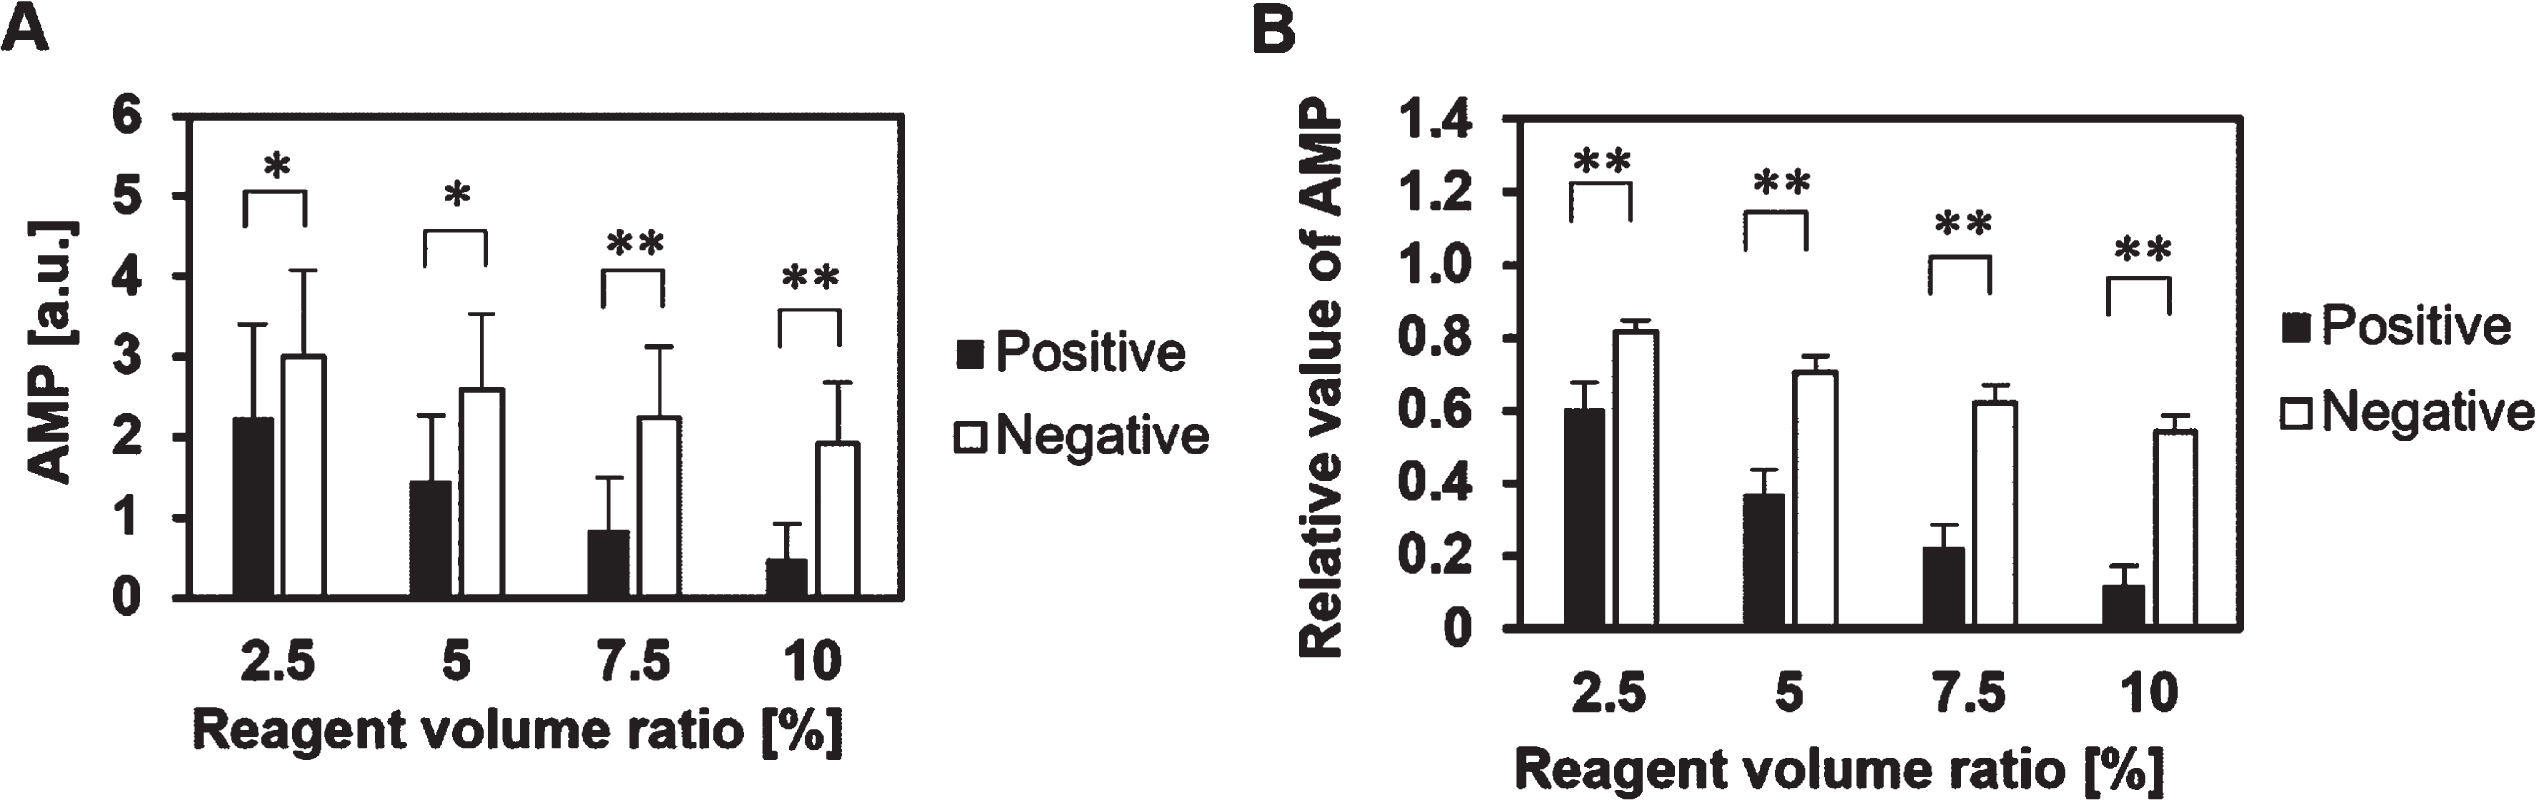 Comparison of the mean of the aggregation parameter AMP between the positive and negative conditions. (A) AMP. Error bars indicate SD (n = 20). *p < 0.05, **p < 0.01 (Welch’s t-test). (B) AMP relative to that of blood before reagent mixing. Error bars indicate SD (n = 20). **p < 0.01 (Welch’s t-test).